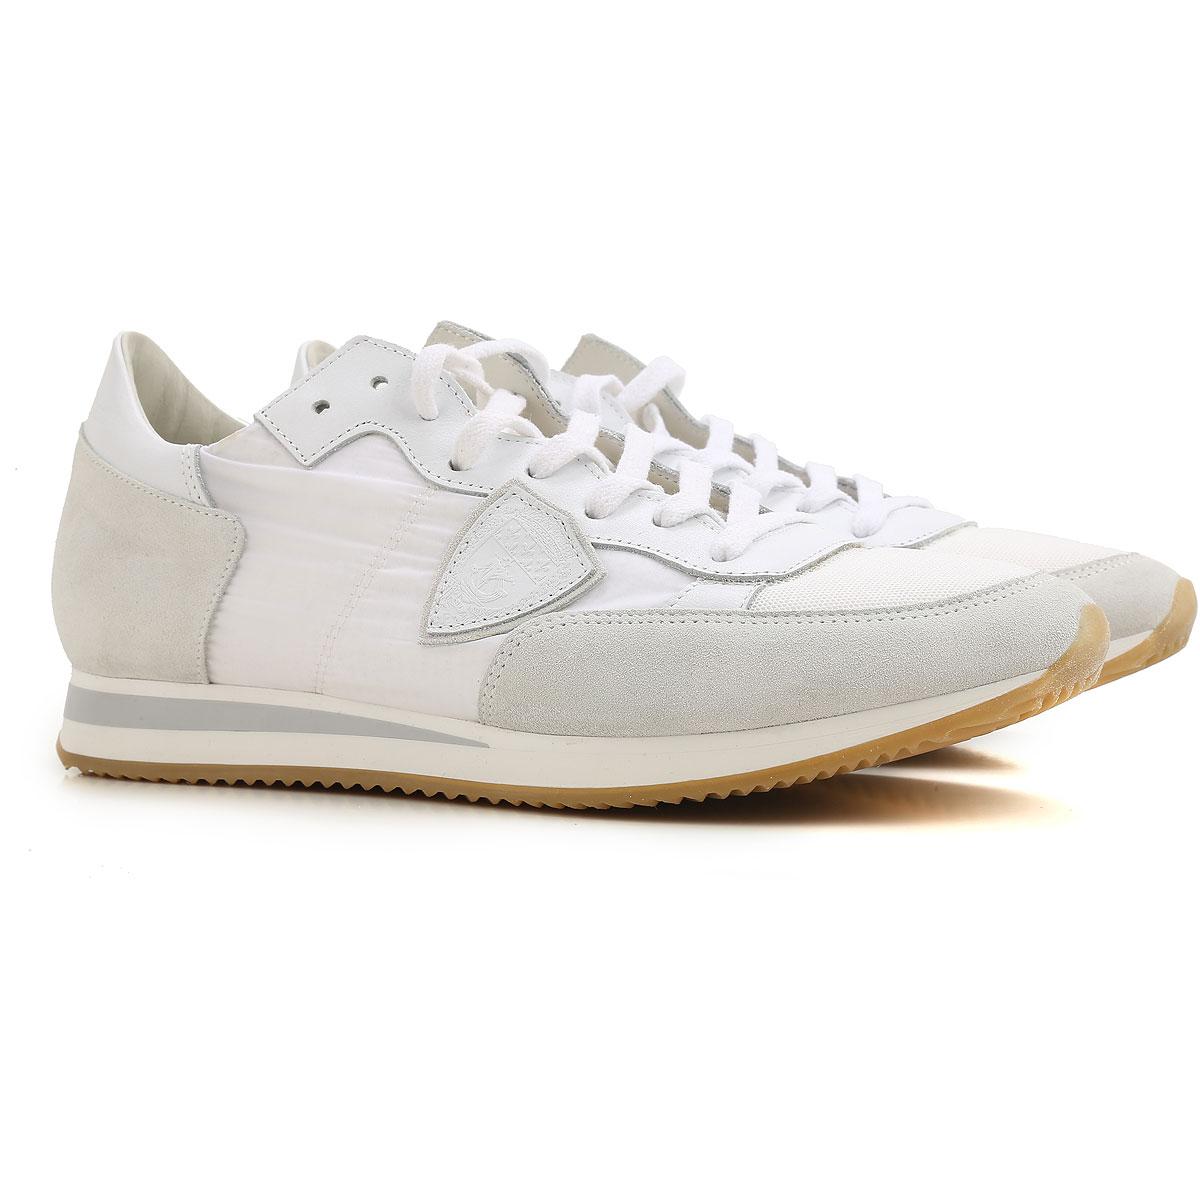 Philippe Model Leather Sneakers For Men in White for Men - Save 21% - Lyst